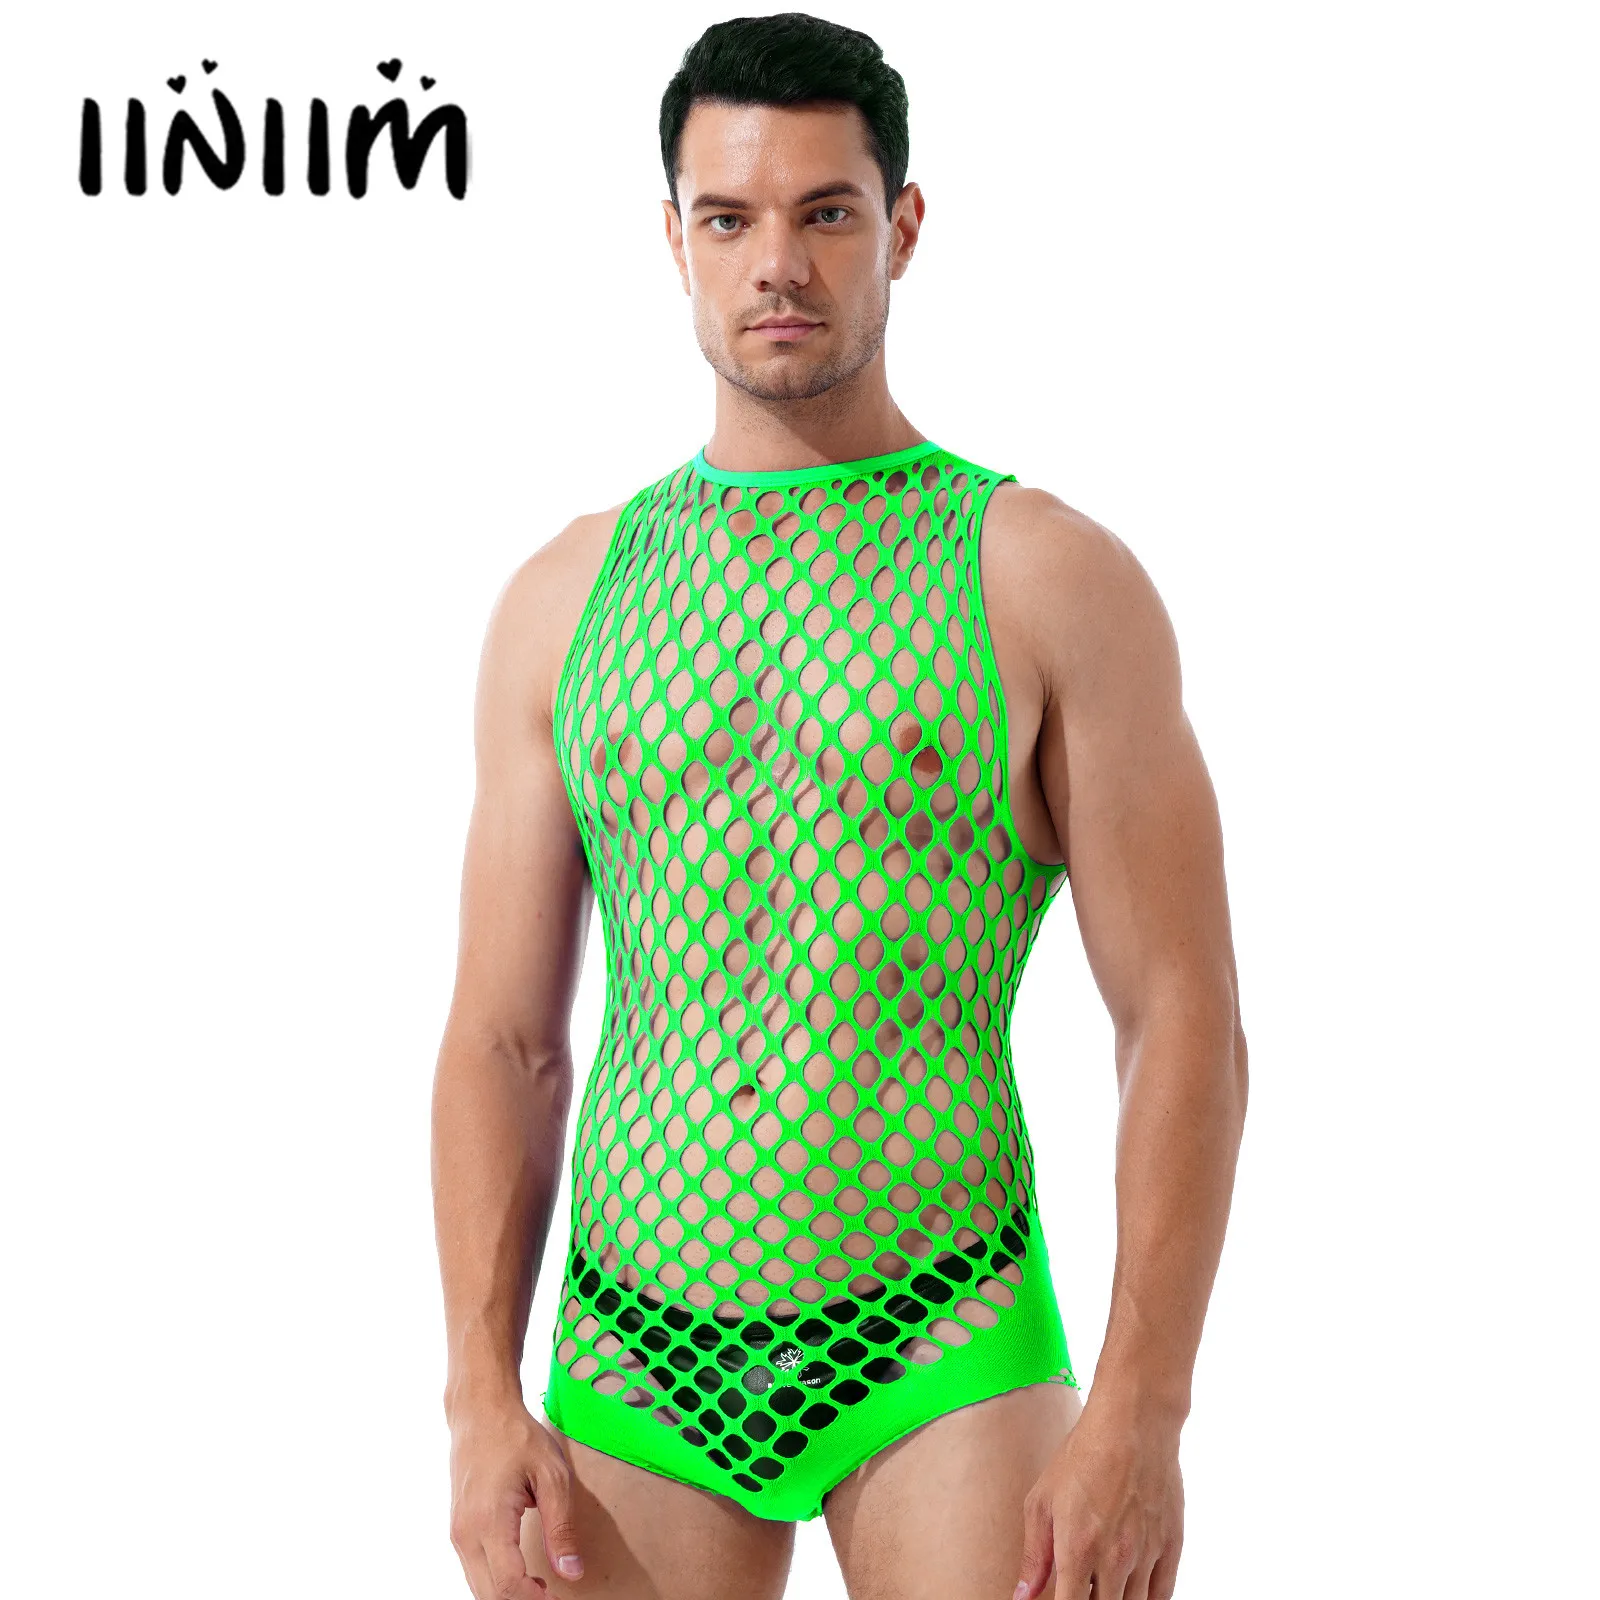 

Mens Lingerie Hollow Out Netted Sexy Bodystockings See-through Stretchy Bodysuits Nightwear Halter Neck Sleeveless Rompers